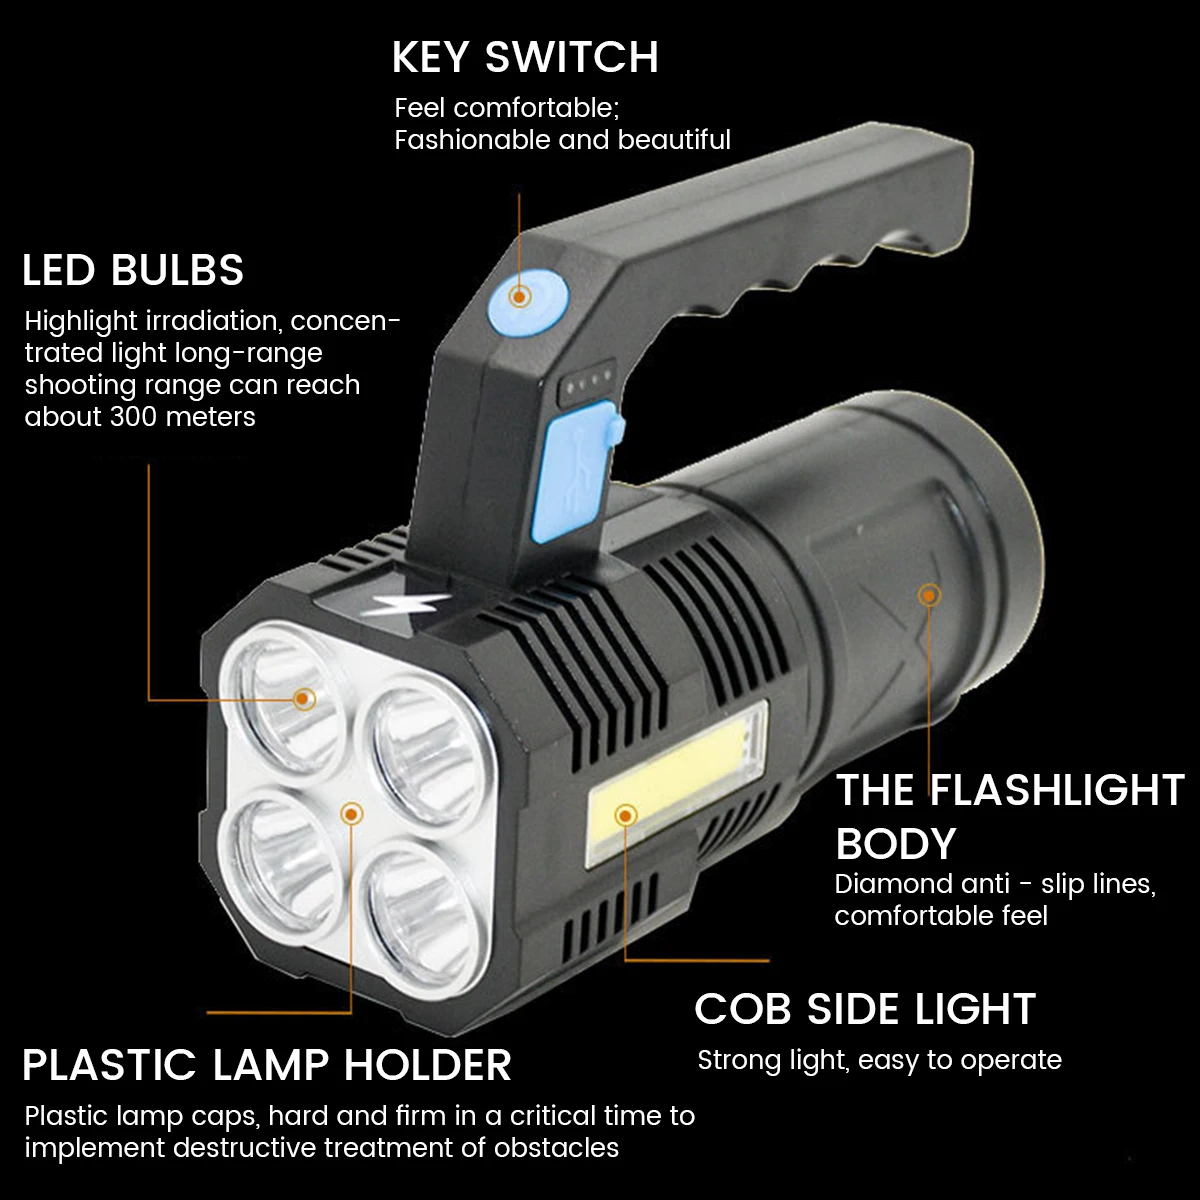 

New LED Searchlight for Outdoor with 4 LEDs Spotlight 1200mAh USB Chargeable Strong Light Torch Life-grade Waterproof Flashlight